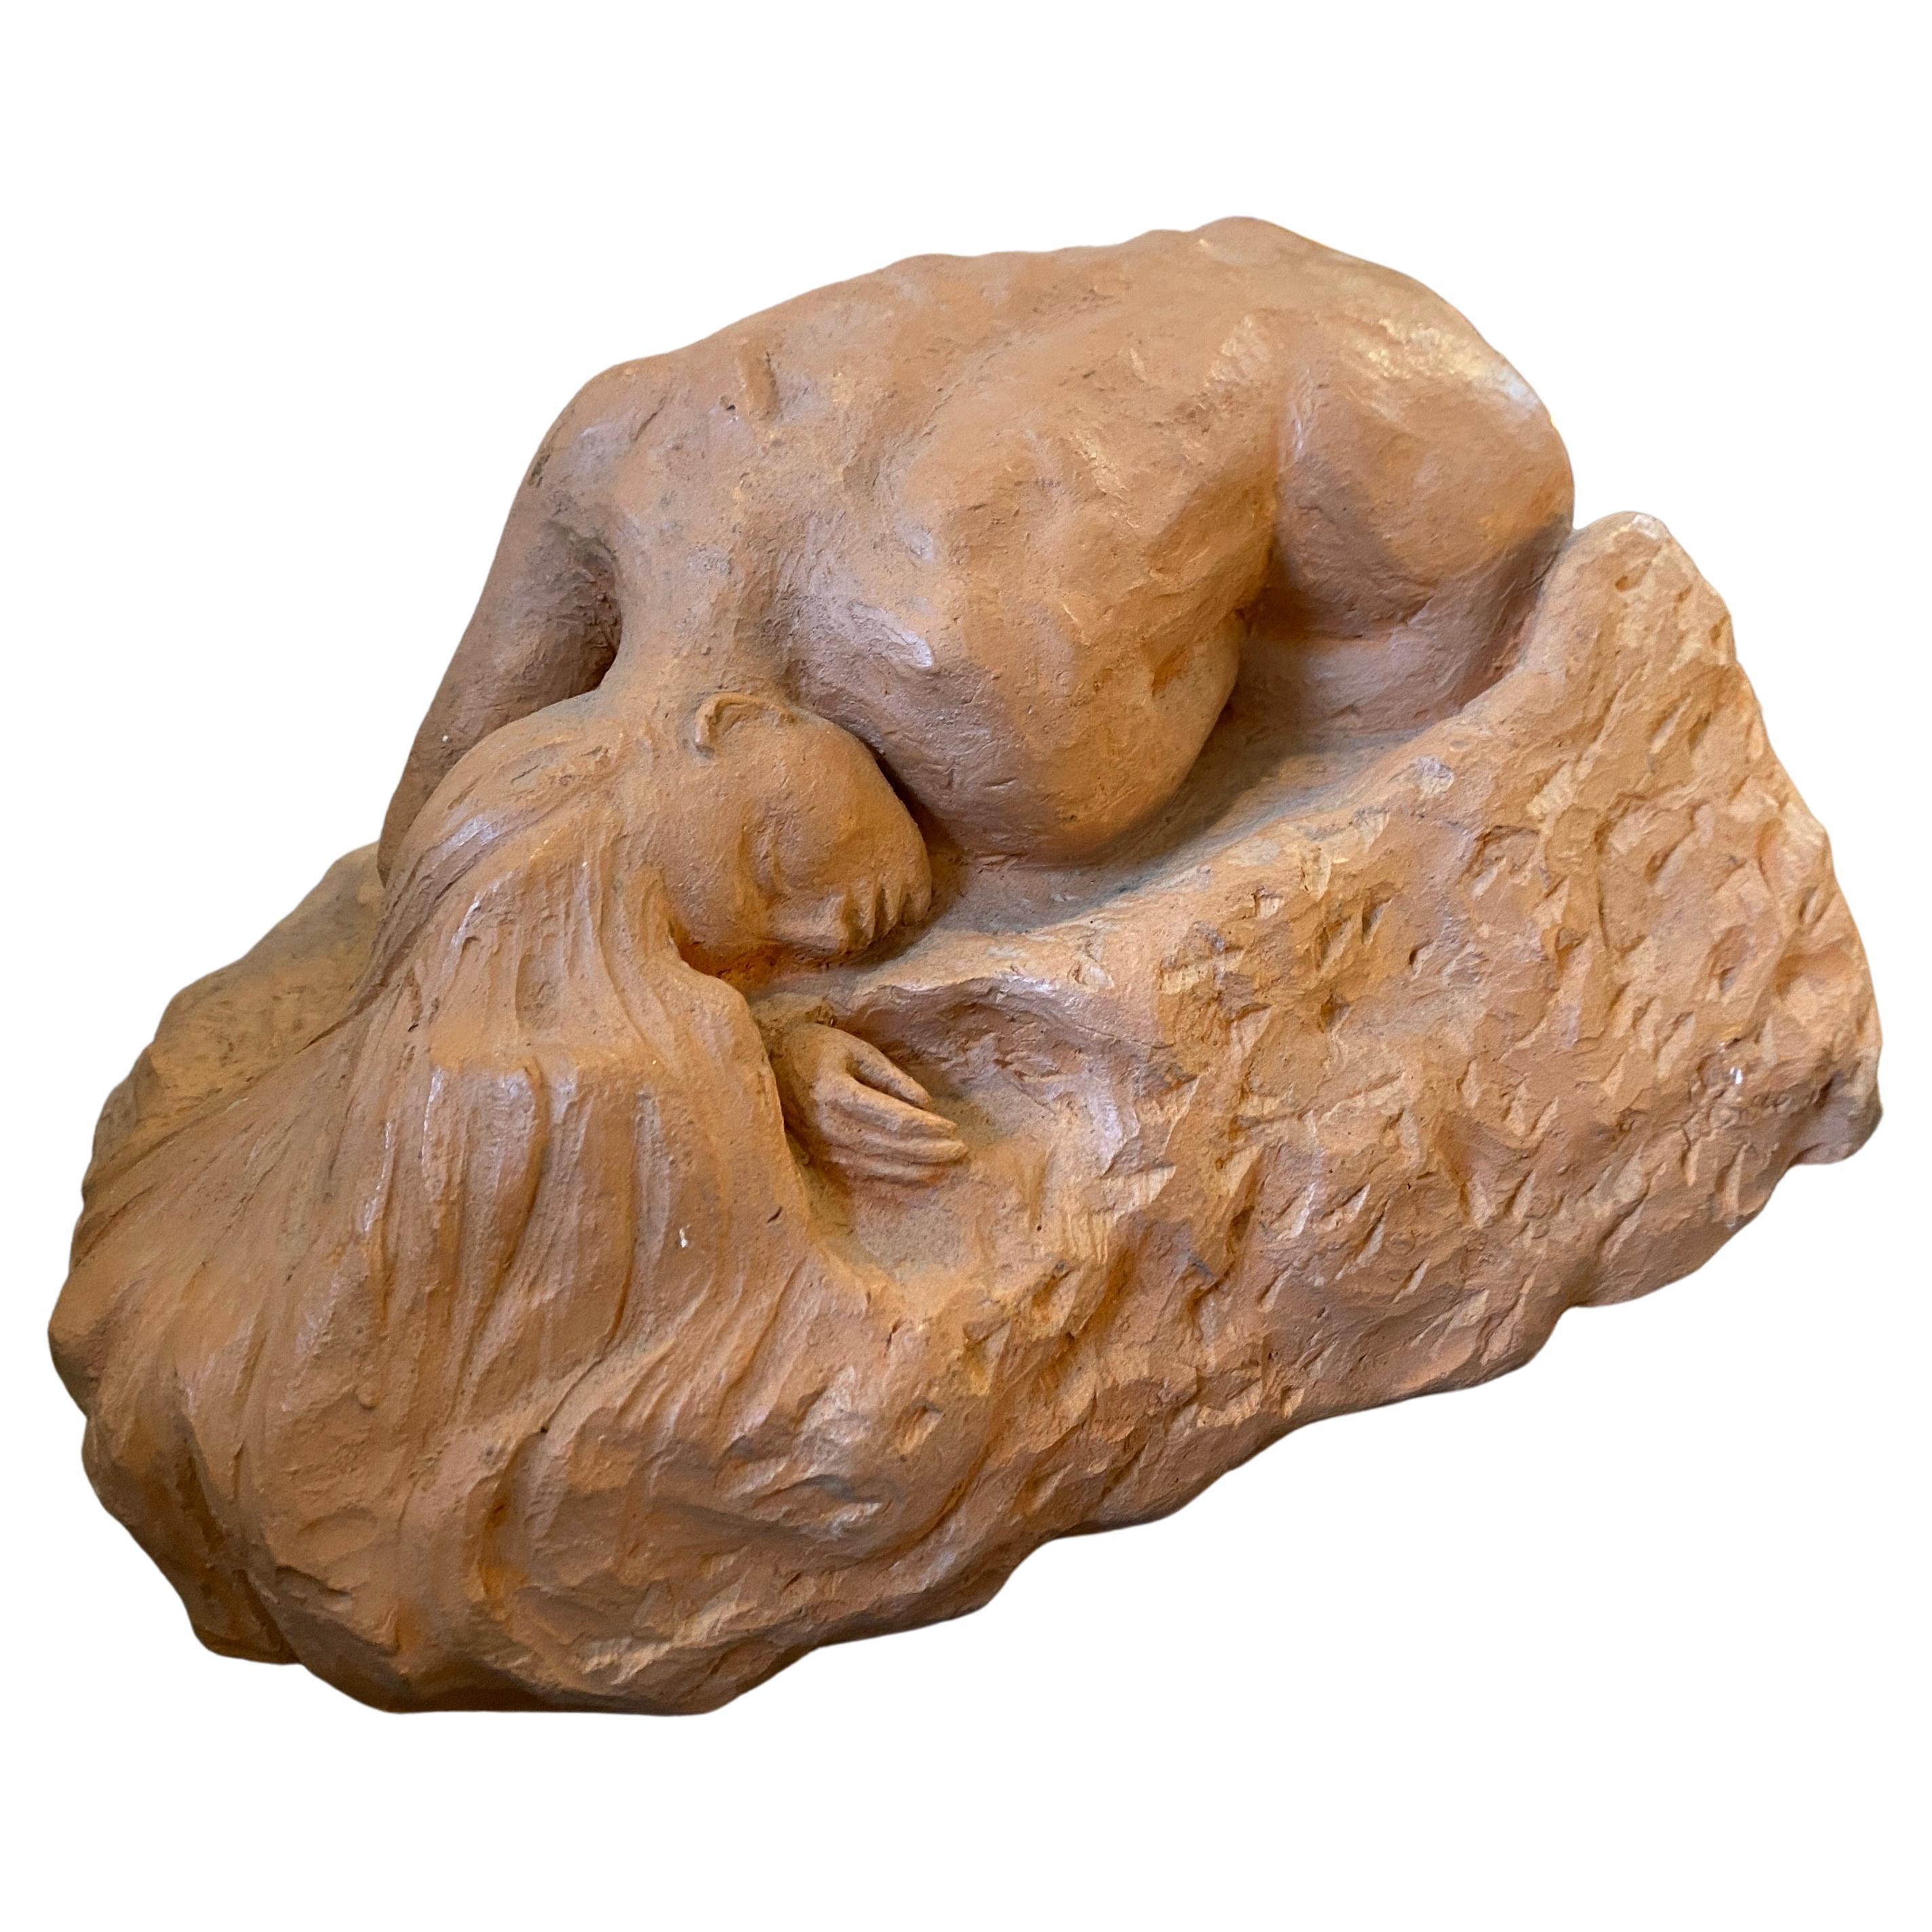 A Sicilian Sculpture by Tudisco created in the 1970s, in very good conditions, signed on a side. The sculpture portrays a lying naked woman 
Terracotta is a type of clay-based ceramic material that has been widely used throughout history for